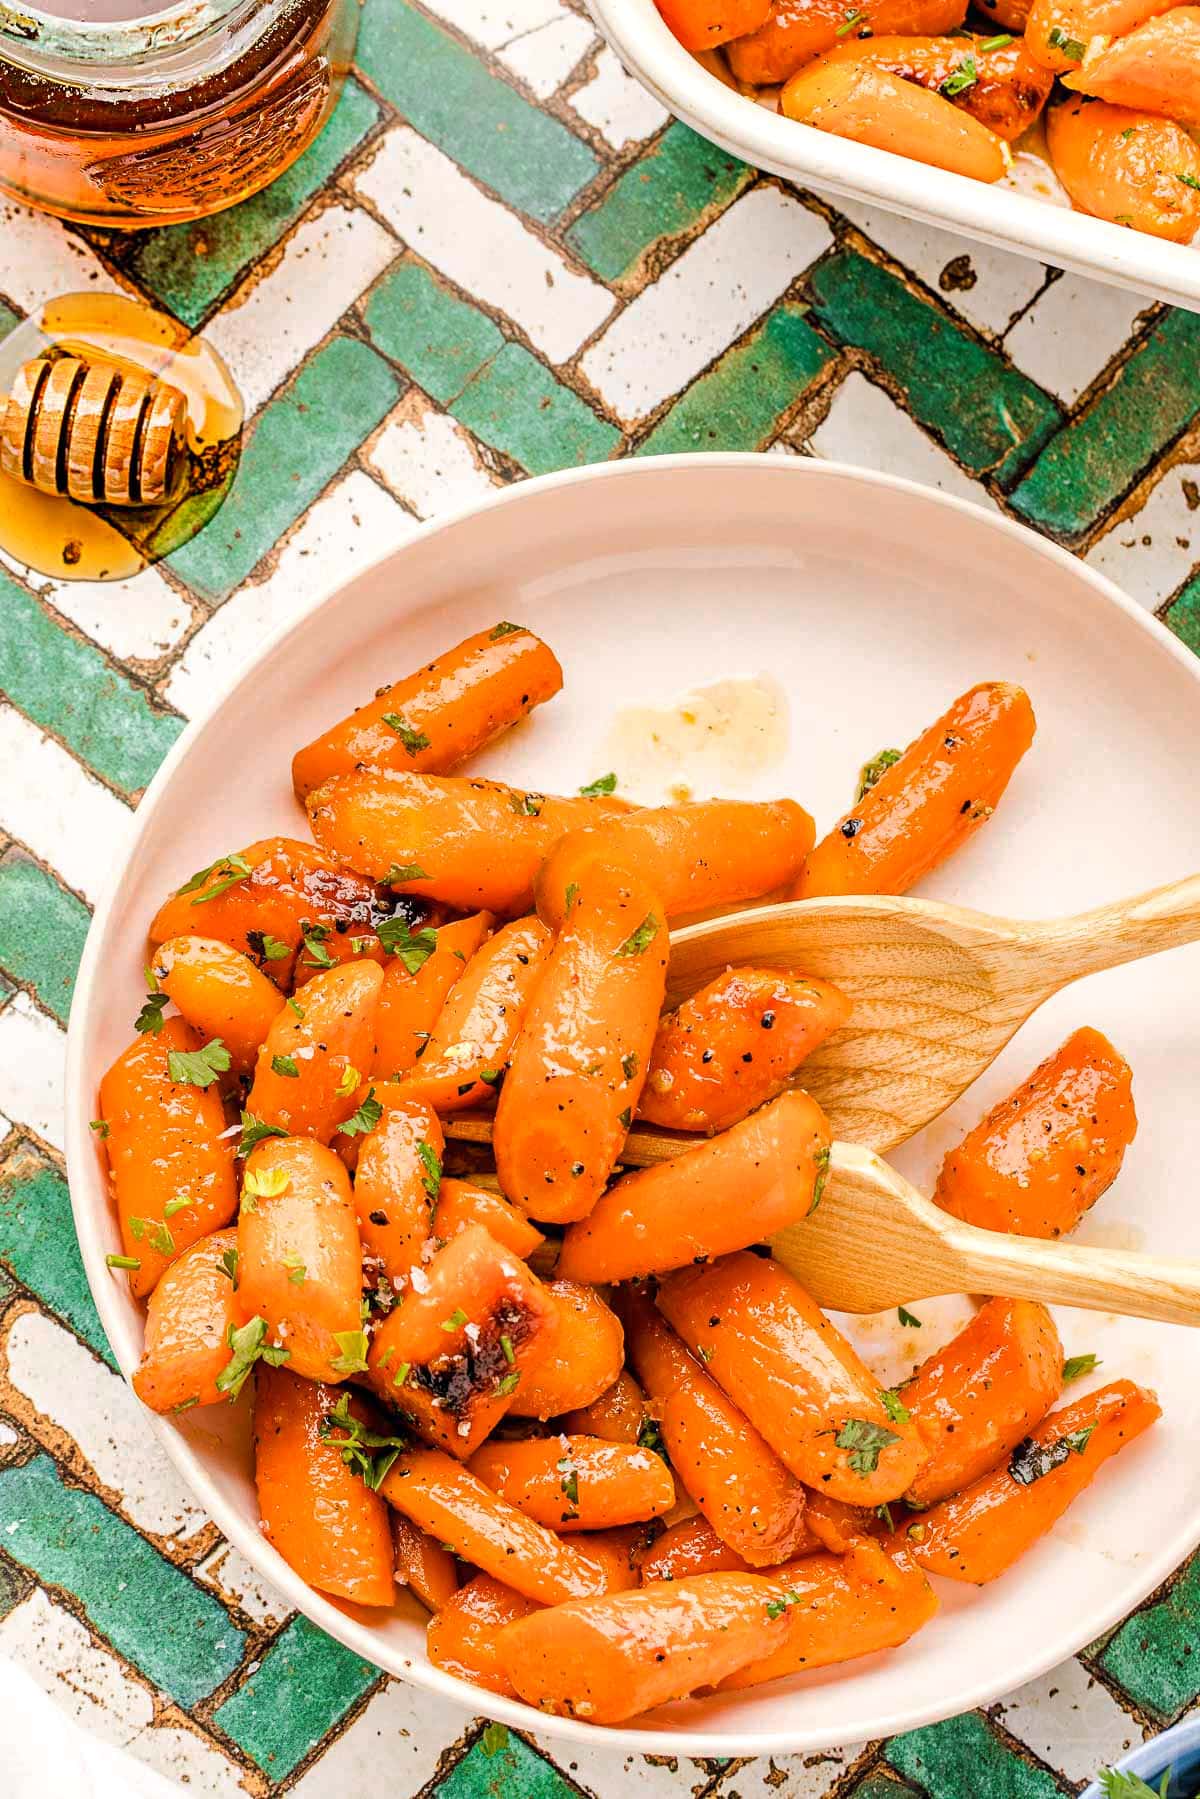 honey glazed carrots on a round white plate garnished with fresh parsley. the plate is on a teal and white chevron tile surface.